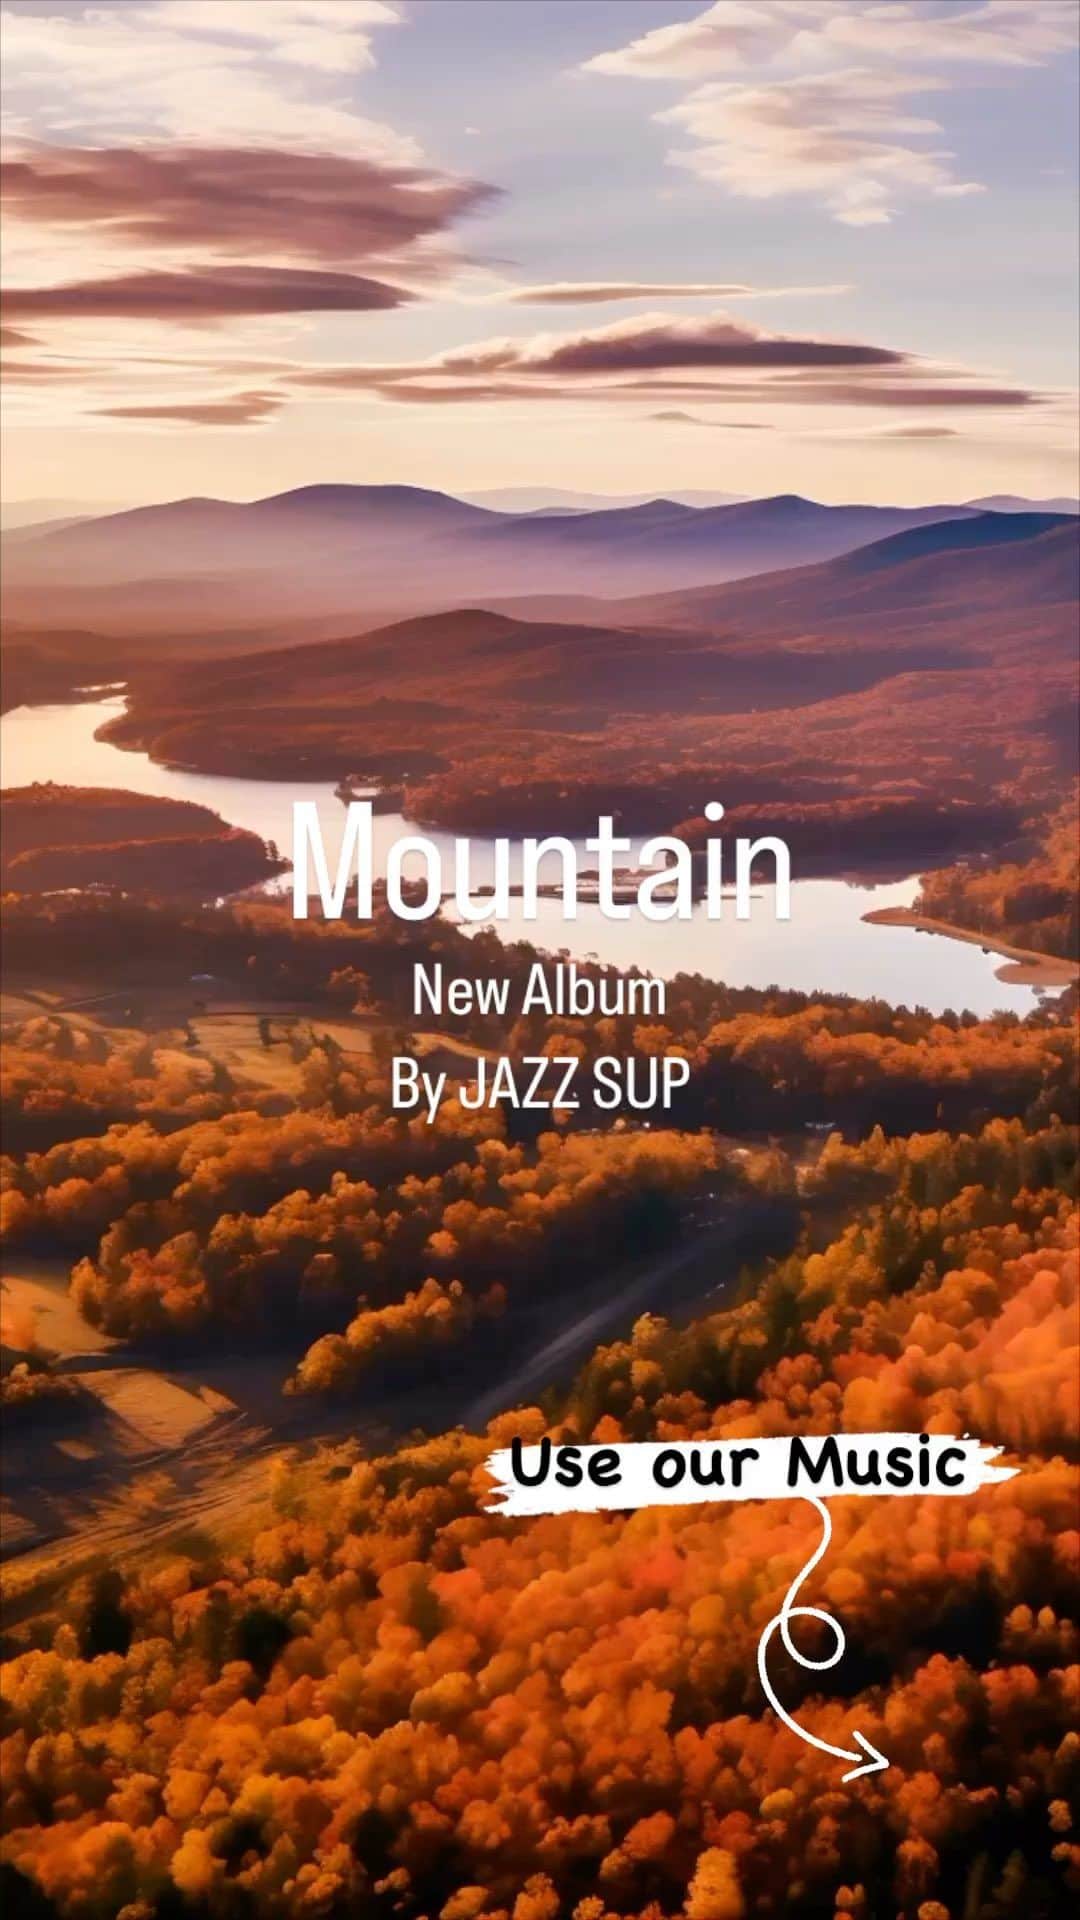 Cafe Music BGM channelのインスタグラム：「Ascend to Musical Peaks with JAZZ SUP's 'Mountain' 🏔️ A Jazz Serenity #Jazz #Mountain #MusicalPeaks  💿 Listen Everywhere: https://bgmc.lnk.to/11J0j9M8 🎵 JAZZ SUP: https://lnk.to/V1YLNb4A  ／ 🎂 New Release ＼ November 10th In Stores 🎧 Mountain  By JAZZ SUP  #EverydayMusic #JazzSerenity #MountainMelodies #SoulfulSounds #RelaxWithJAZZSUP #ElevateYourVibes #EverydayChill #MusicalEscapes」